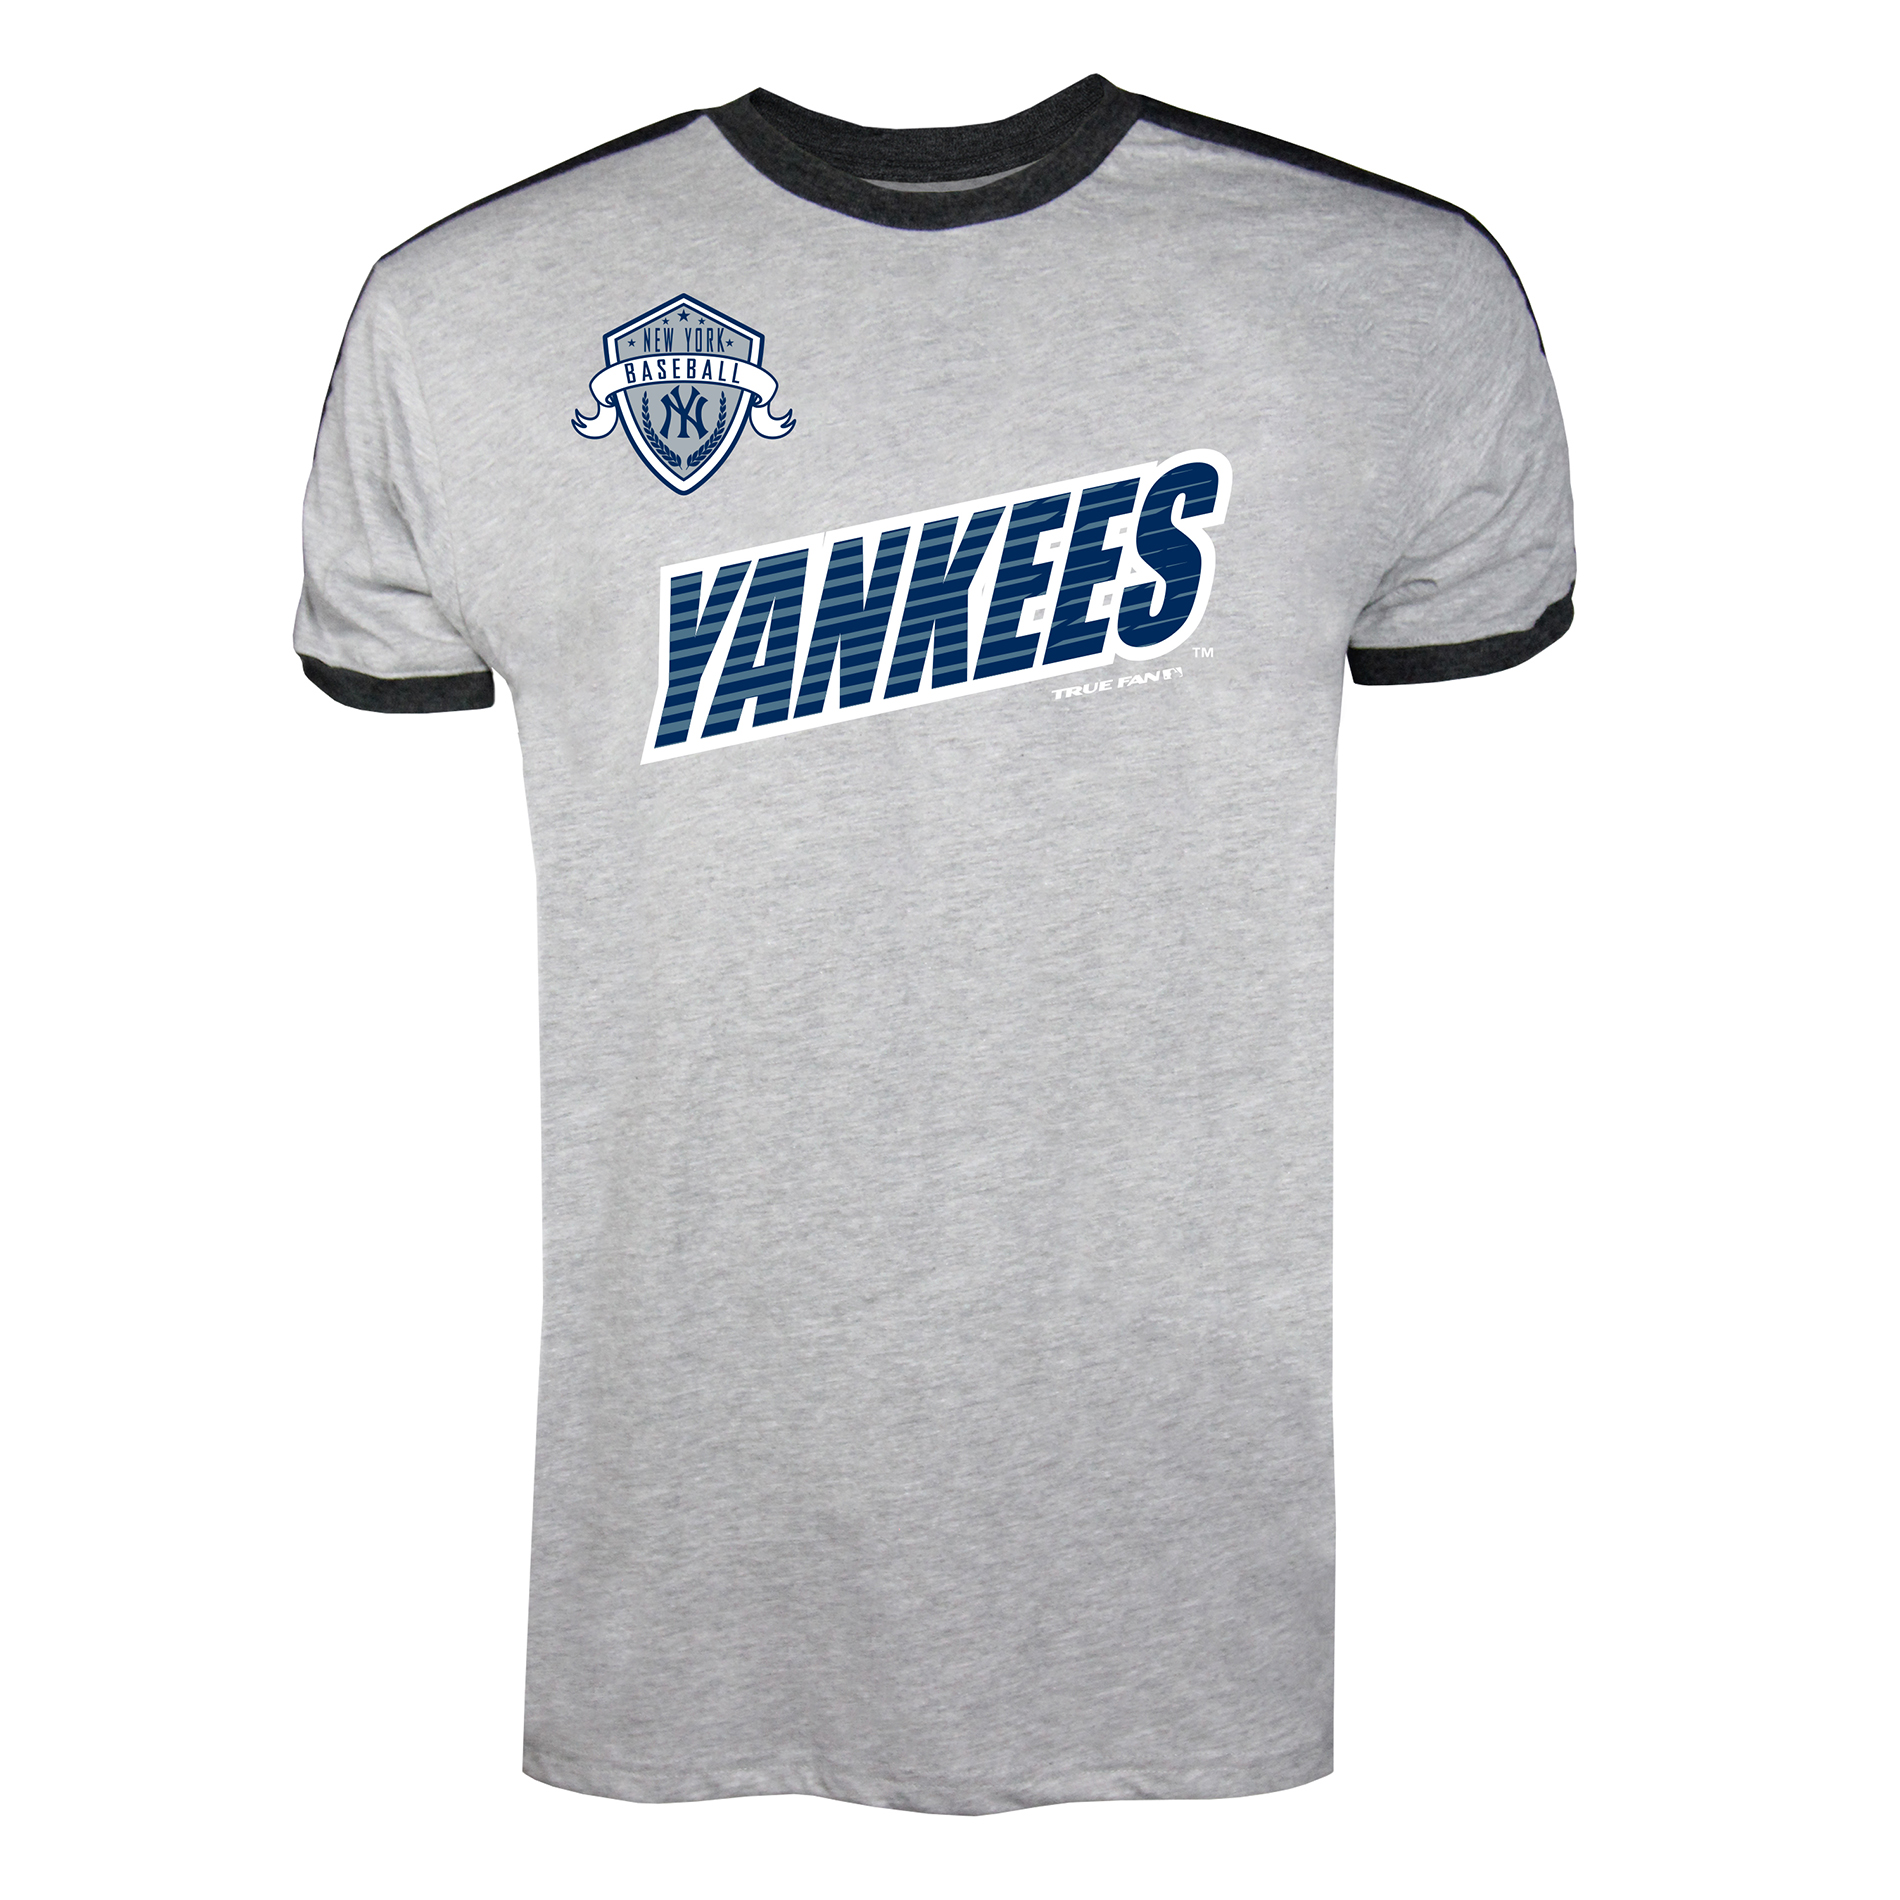 new york yankees outfit